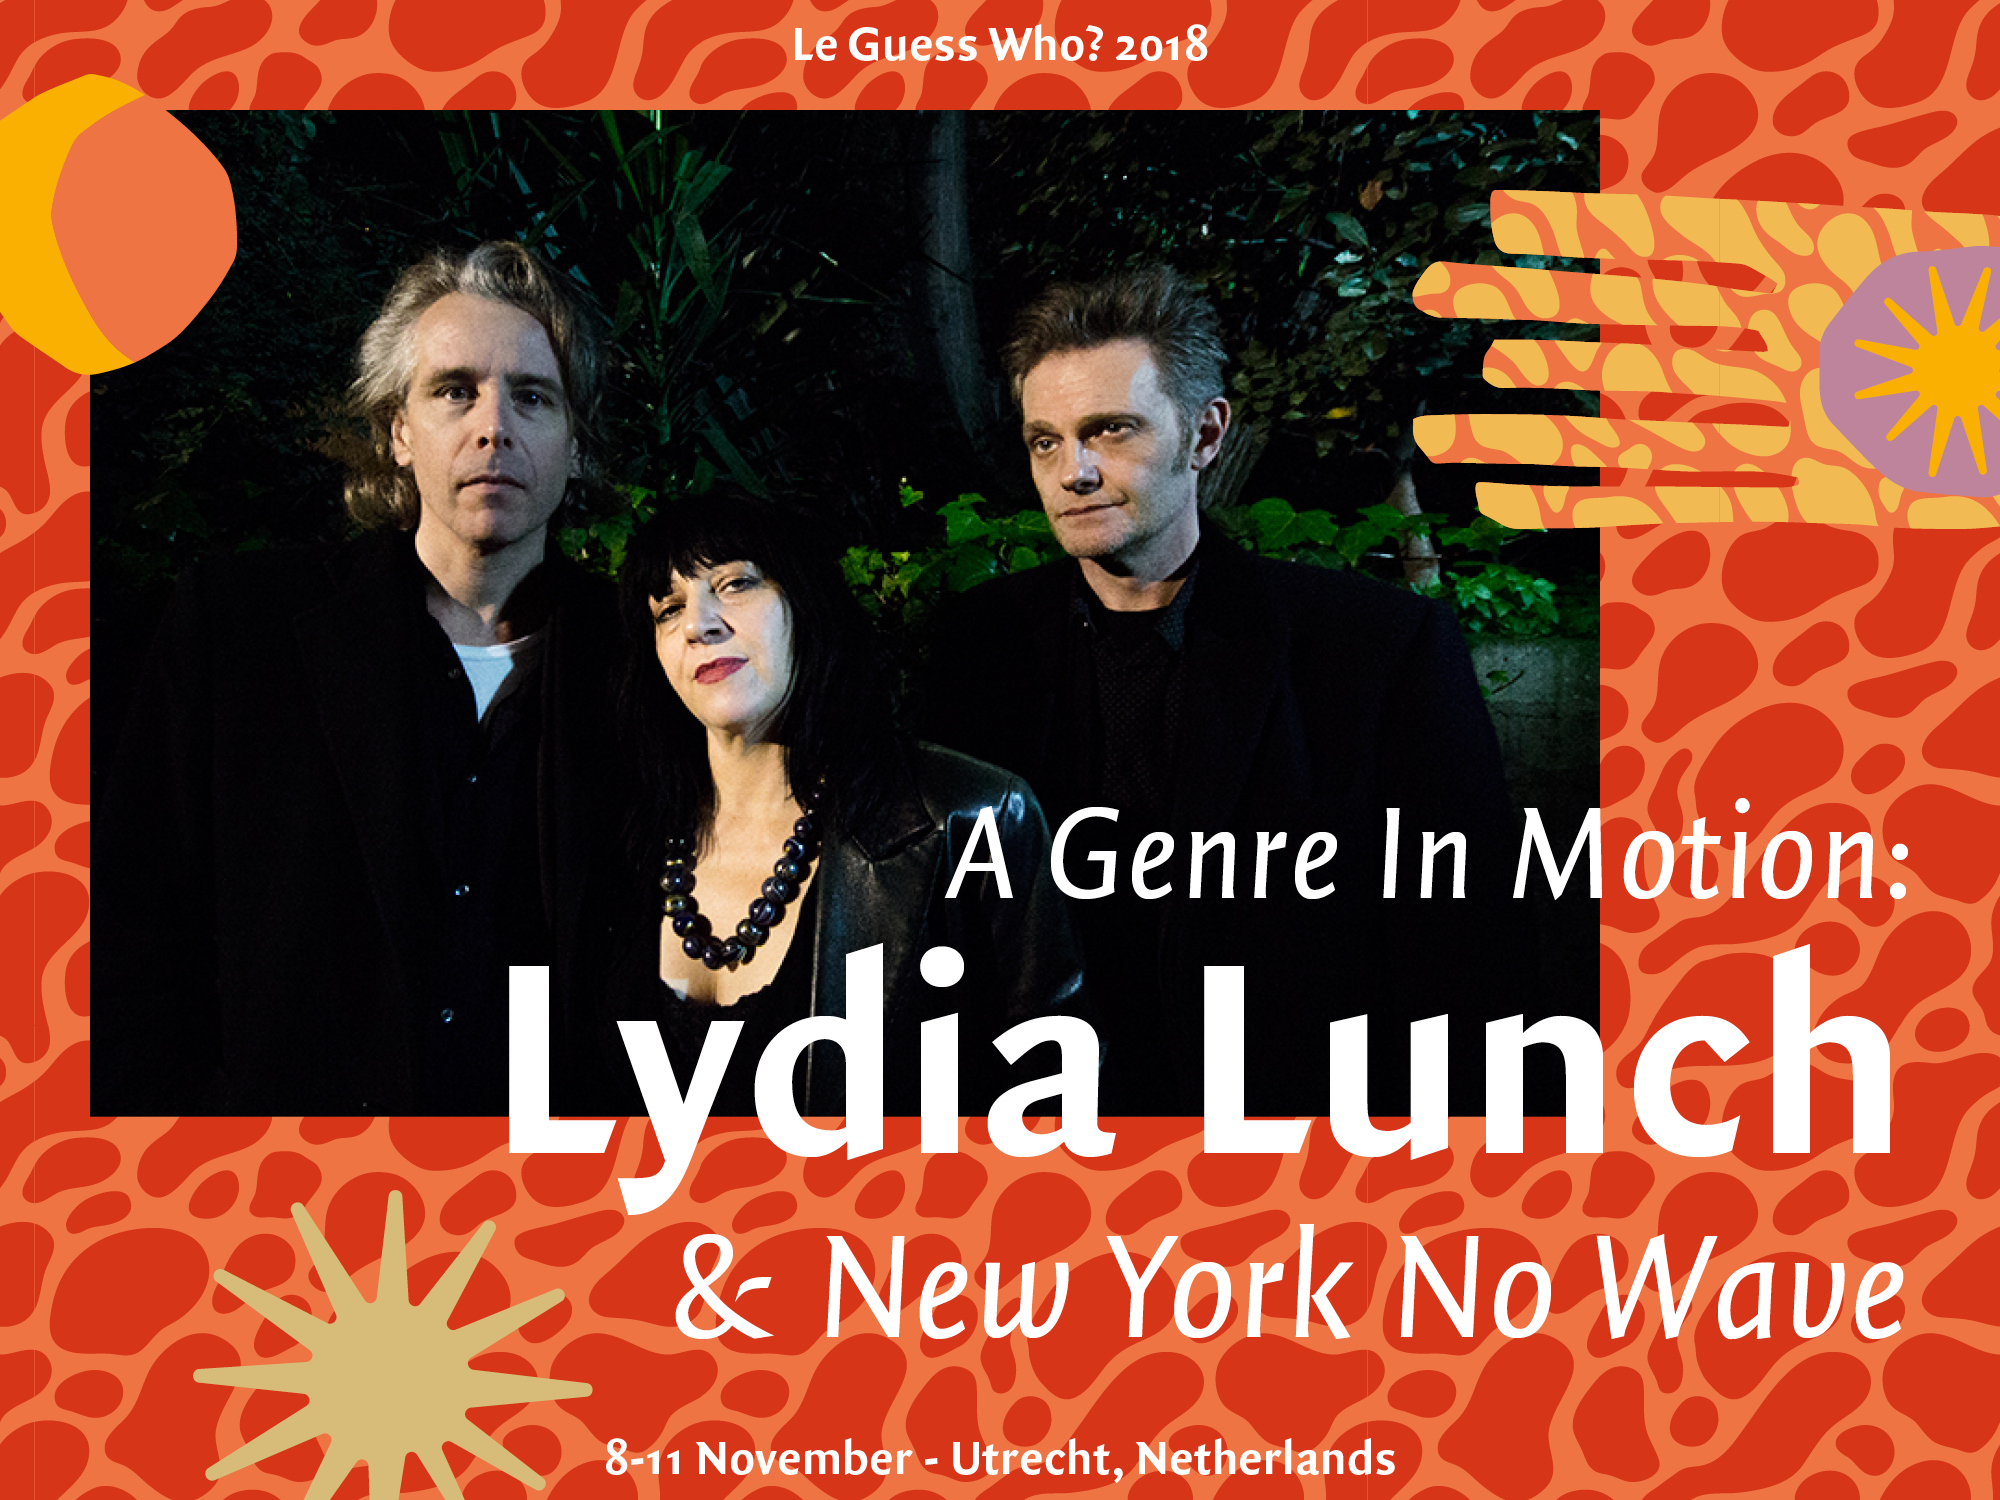 A Genre In Motion: Lydia Lunch & New York No Wave